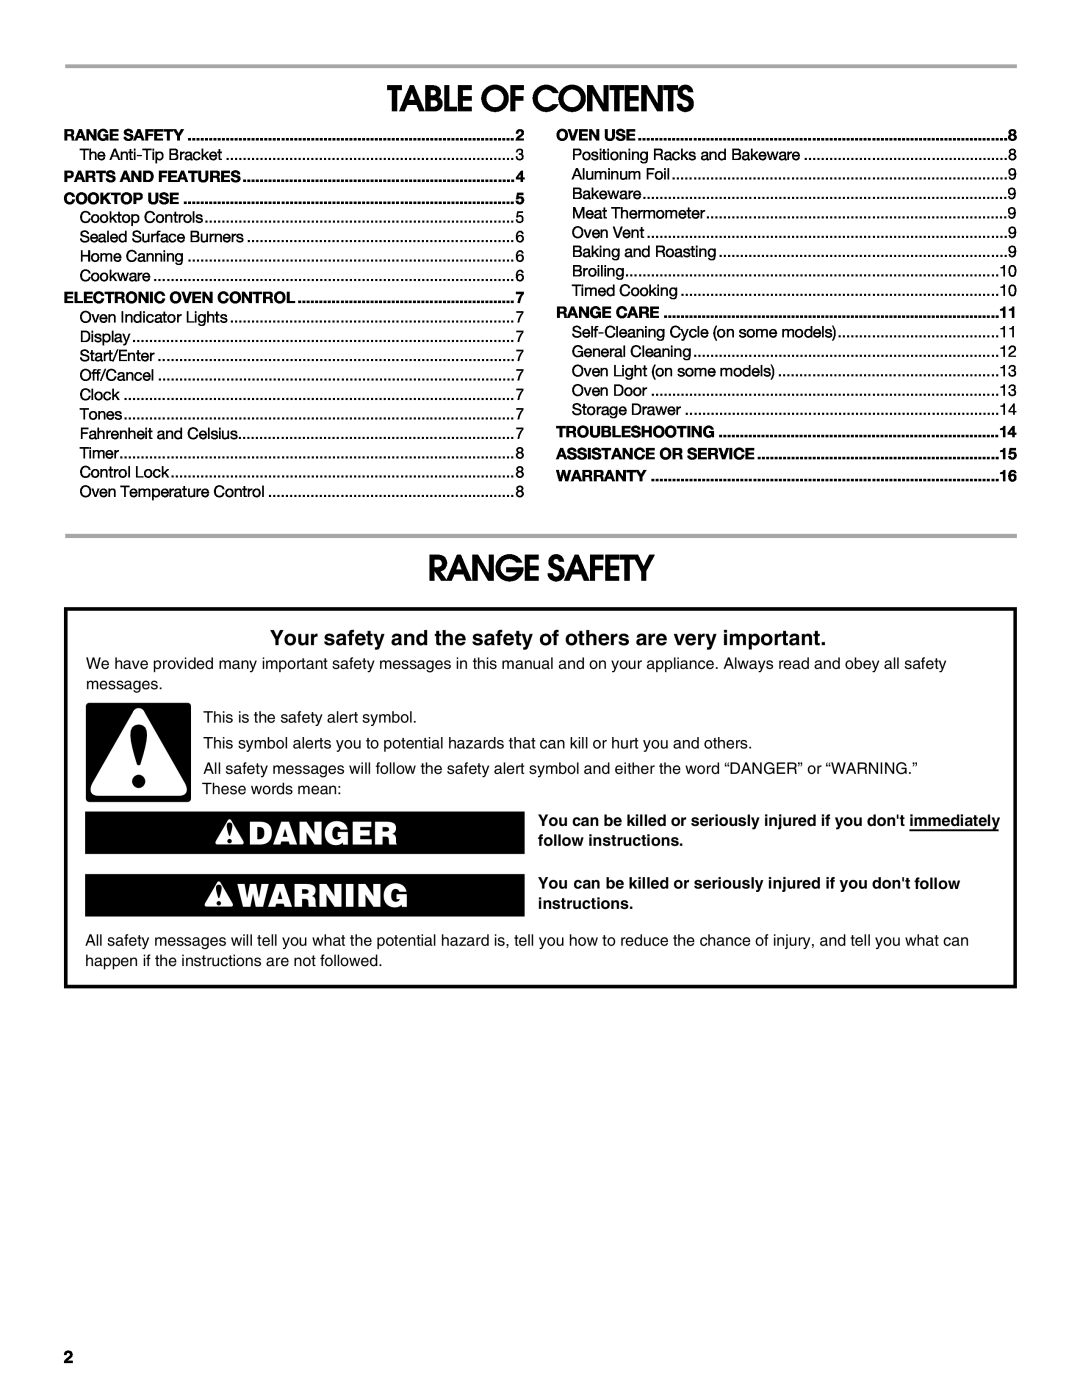 Estate W10017560 manual Table Of Contents, Range Safety, Danger 